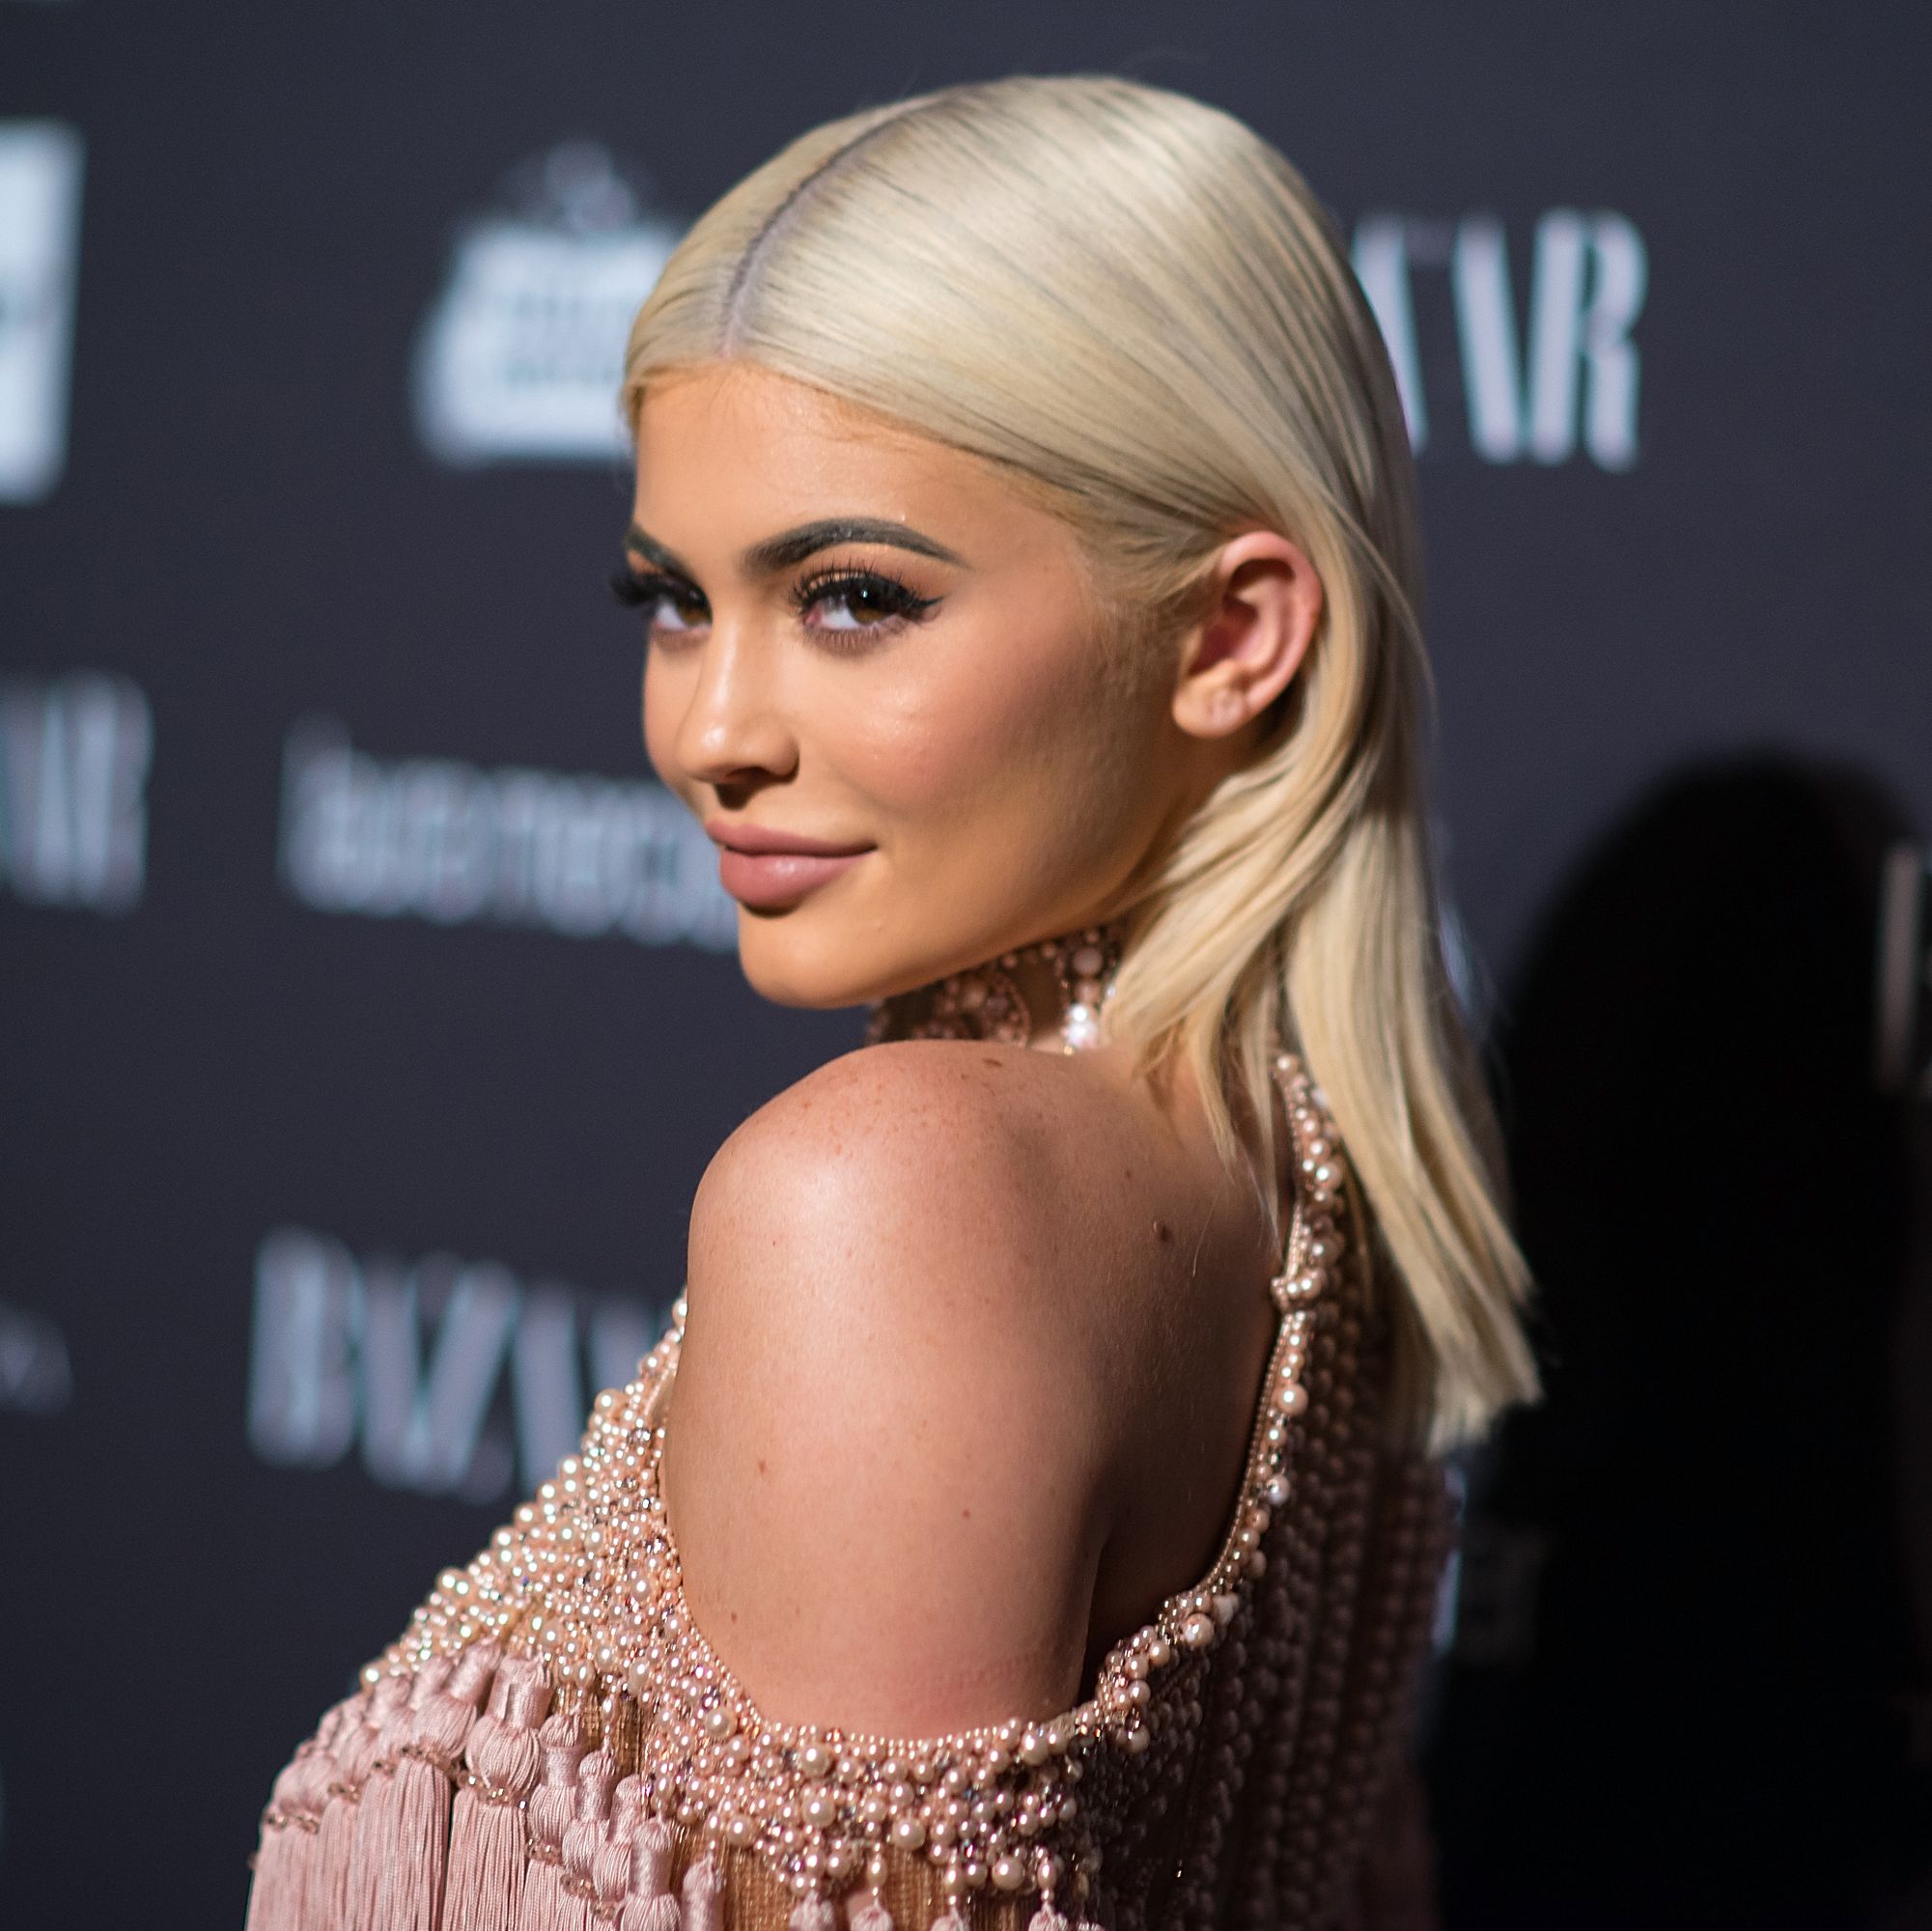 Kylie Jenner Gives Fan a Louis Vuitton Backpack For His Birthday